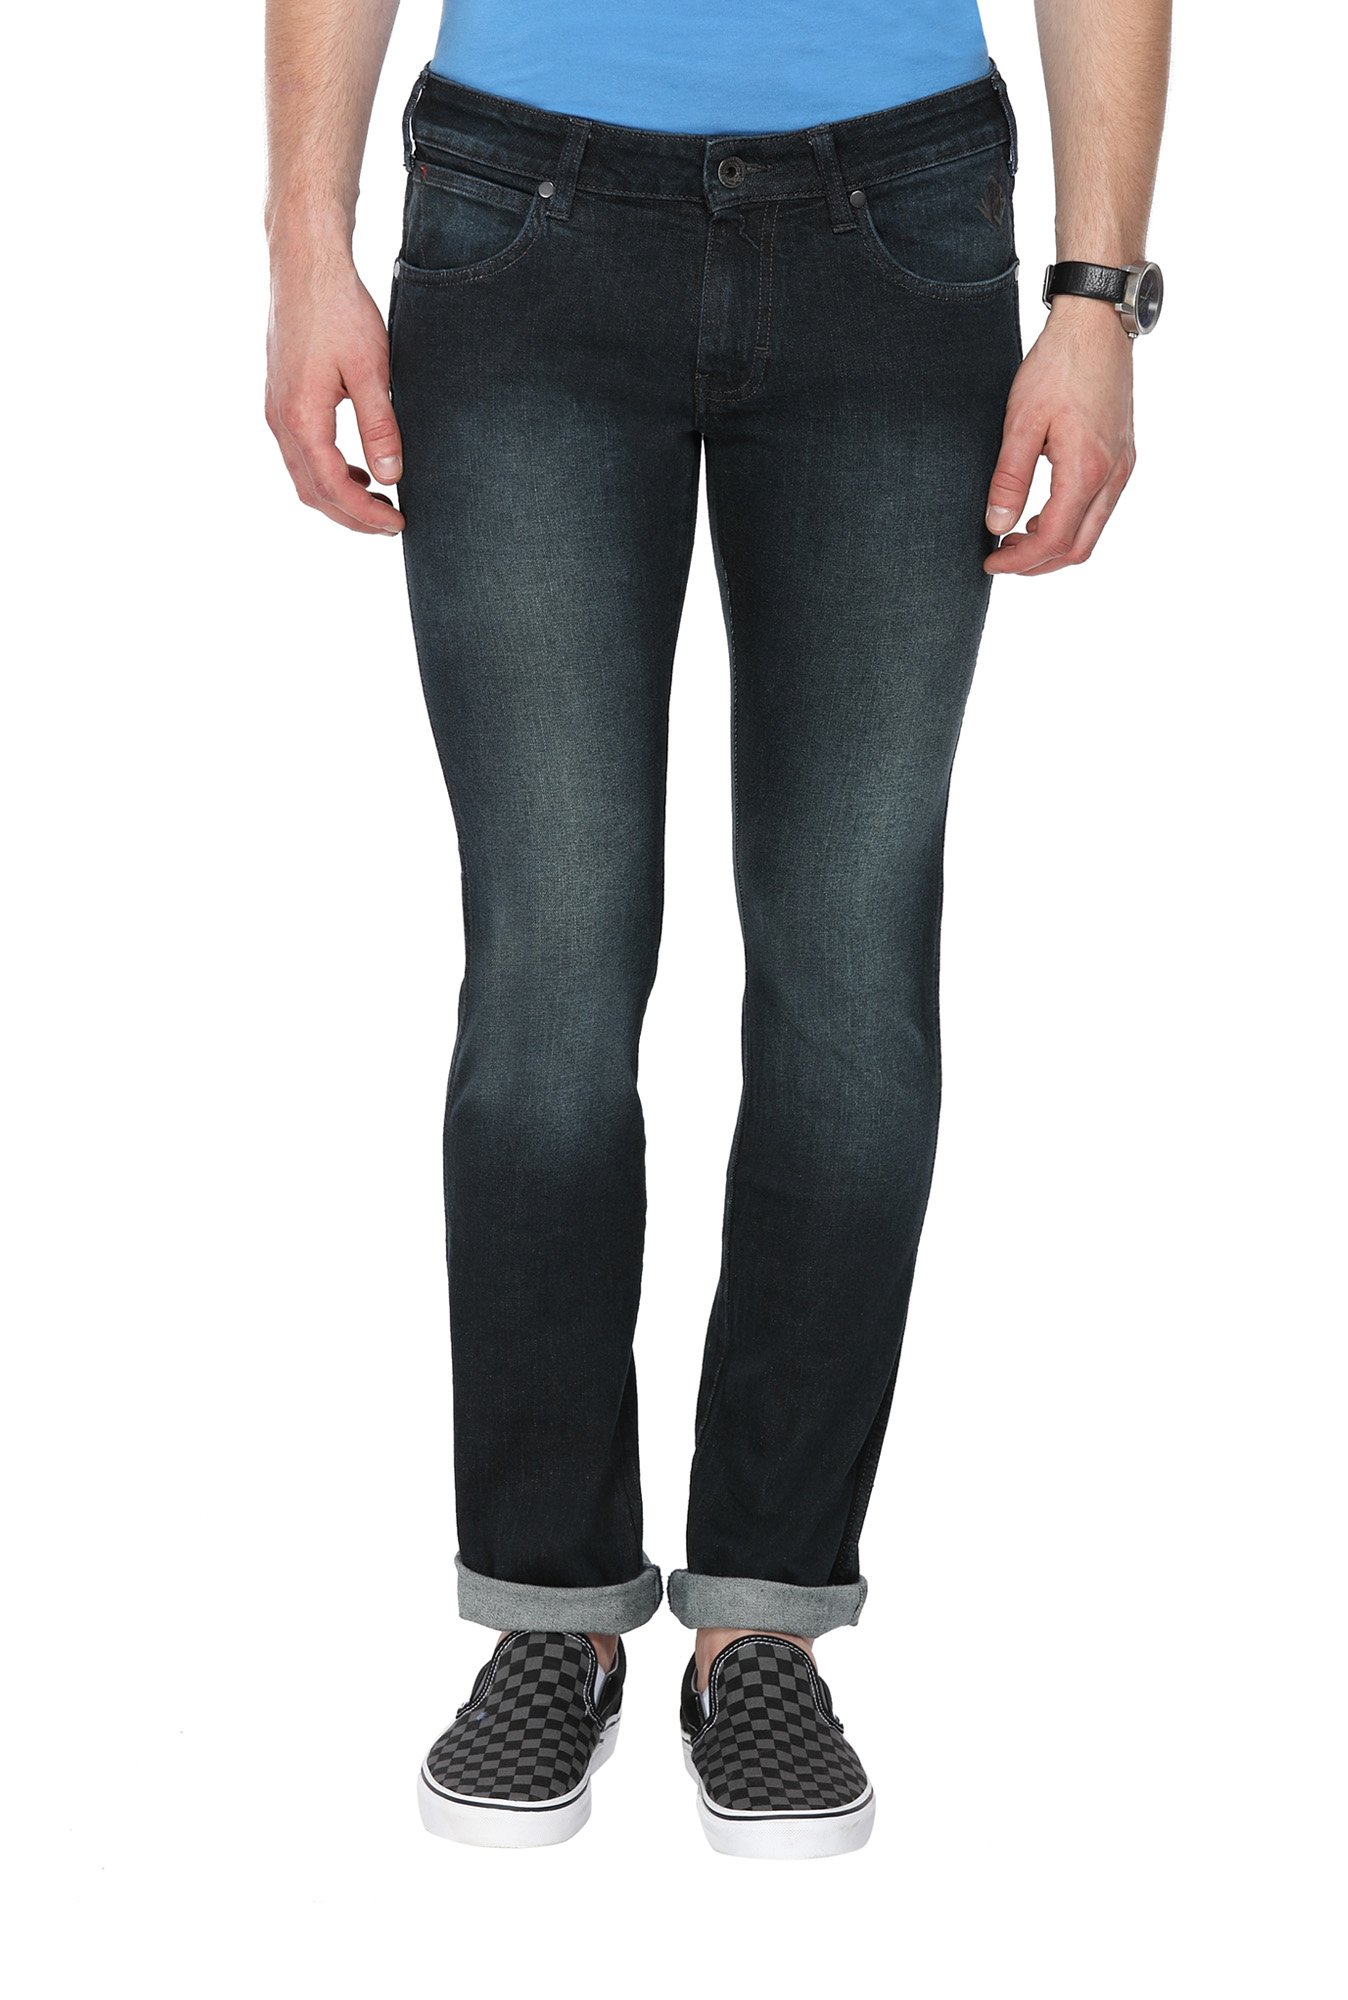 Wrangler Low Rise Jeans - Buy Wrangler Low Rise Jeans online in India